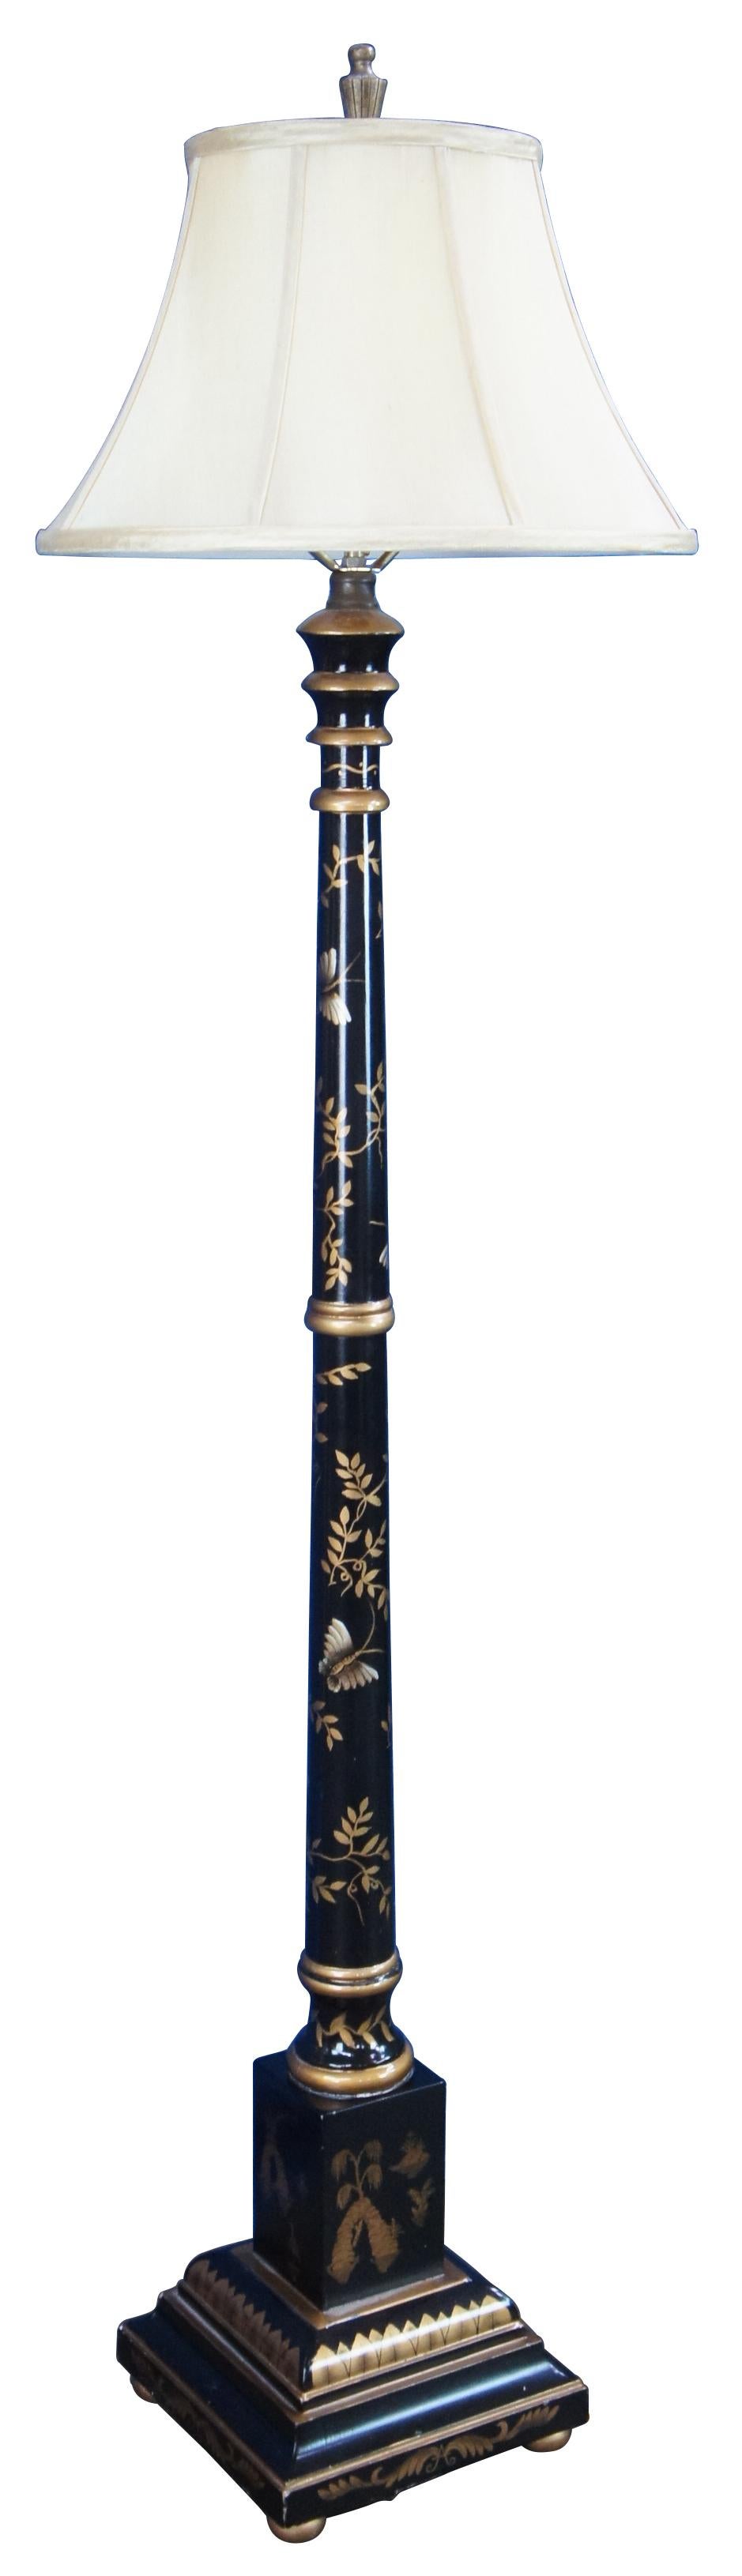 Vintage Chinese floor lamp featuring black lacquered design with gold detail showing a landscape of islands with floral accents and butterfly.

Measures: 10